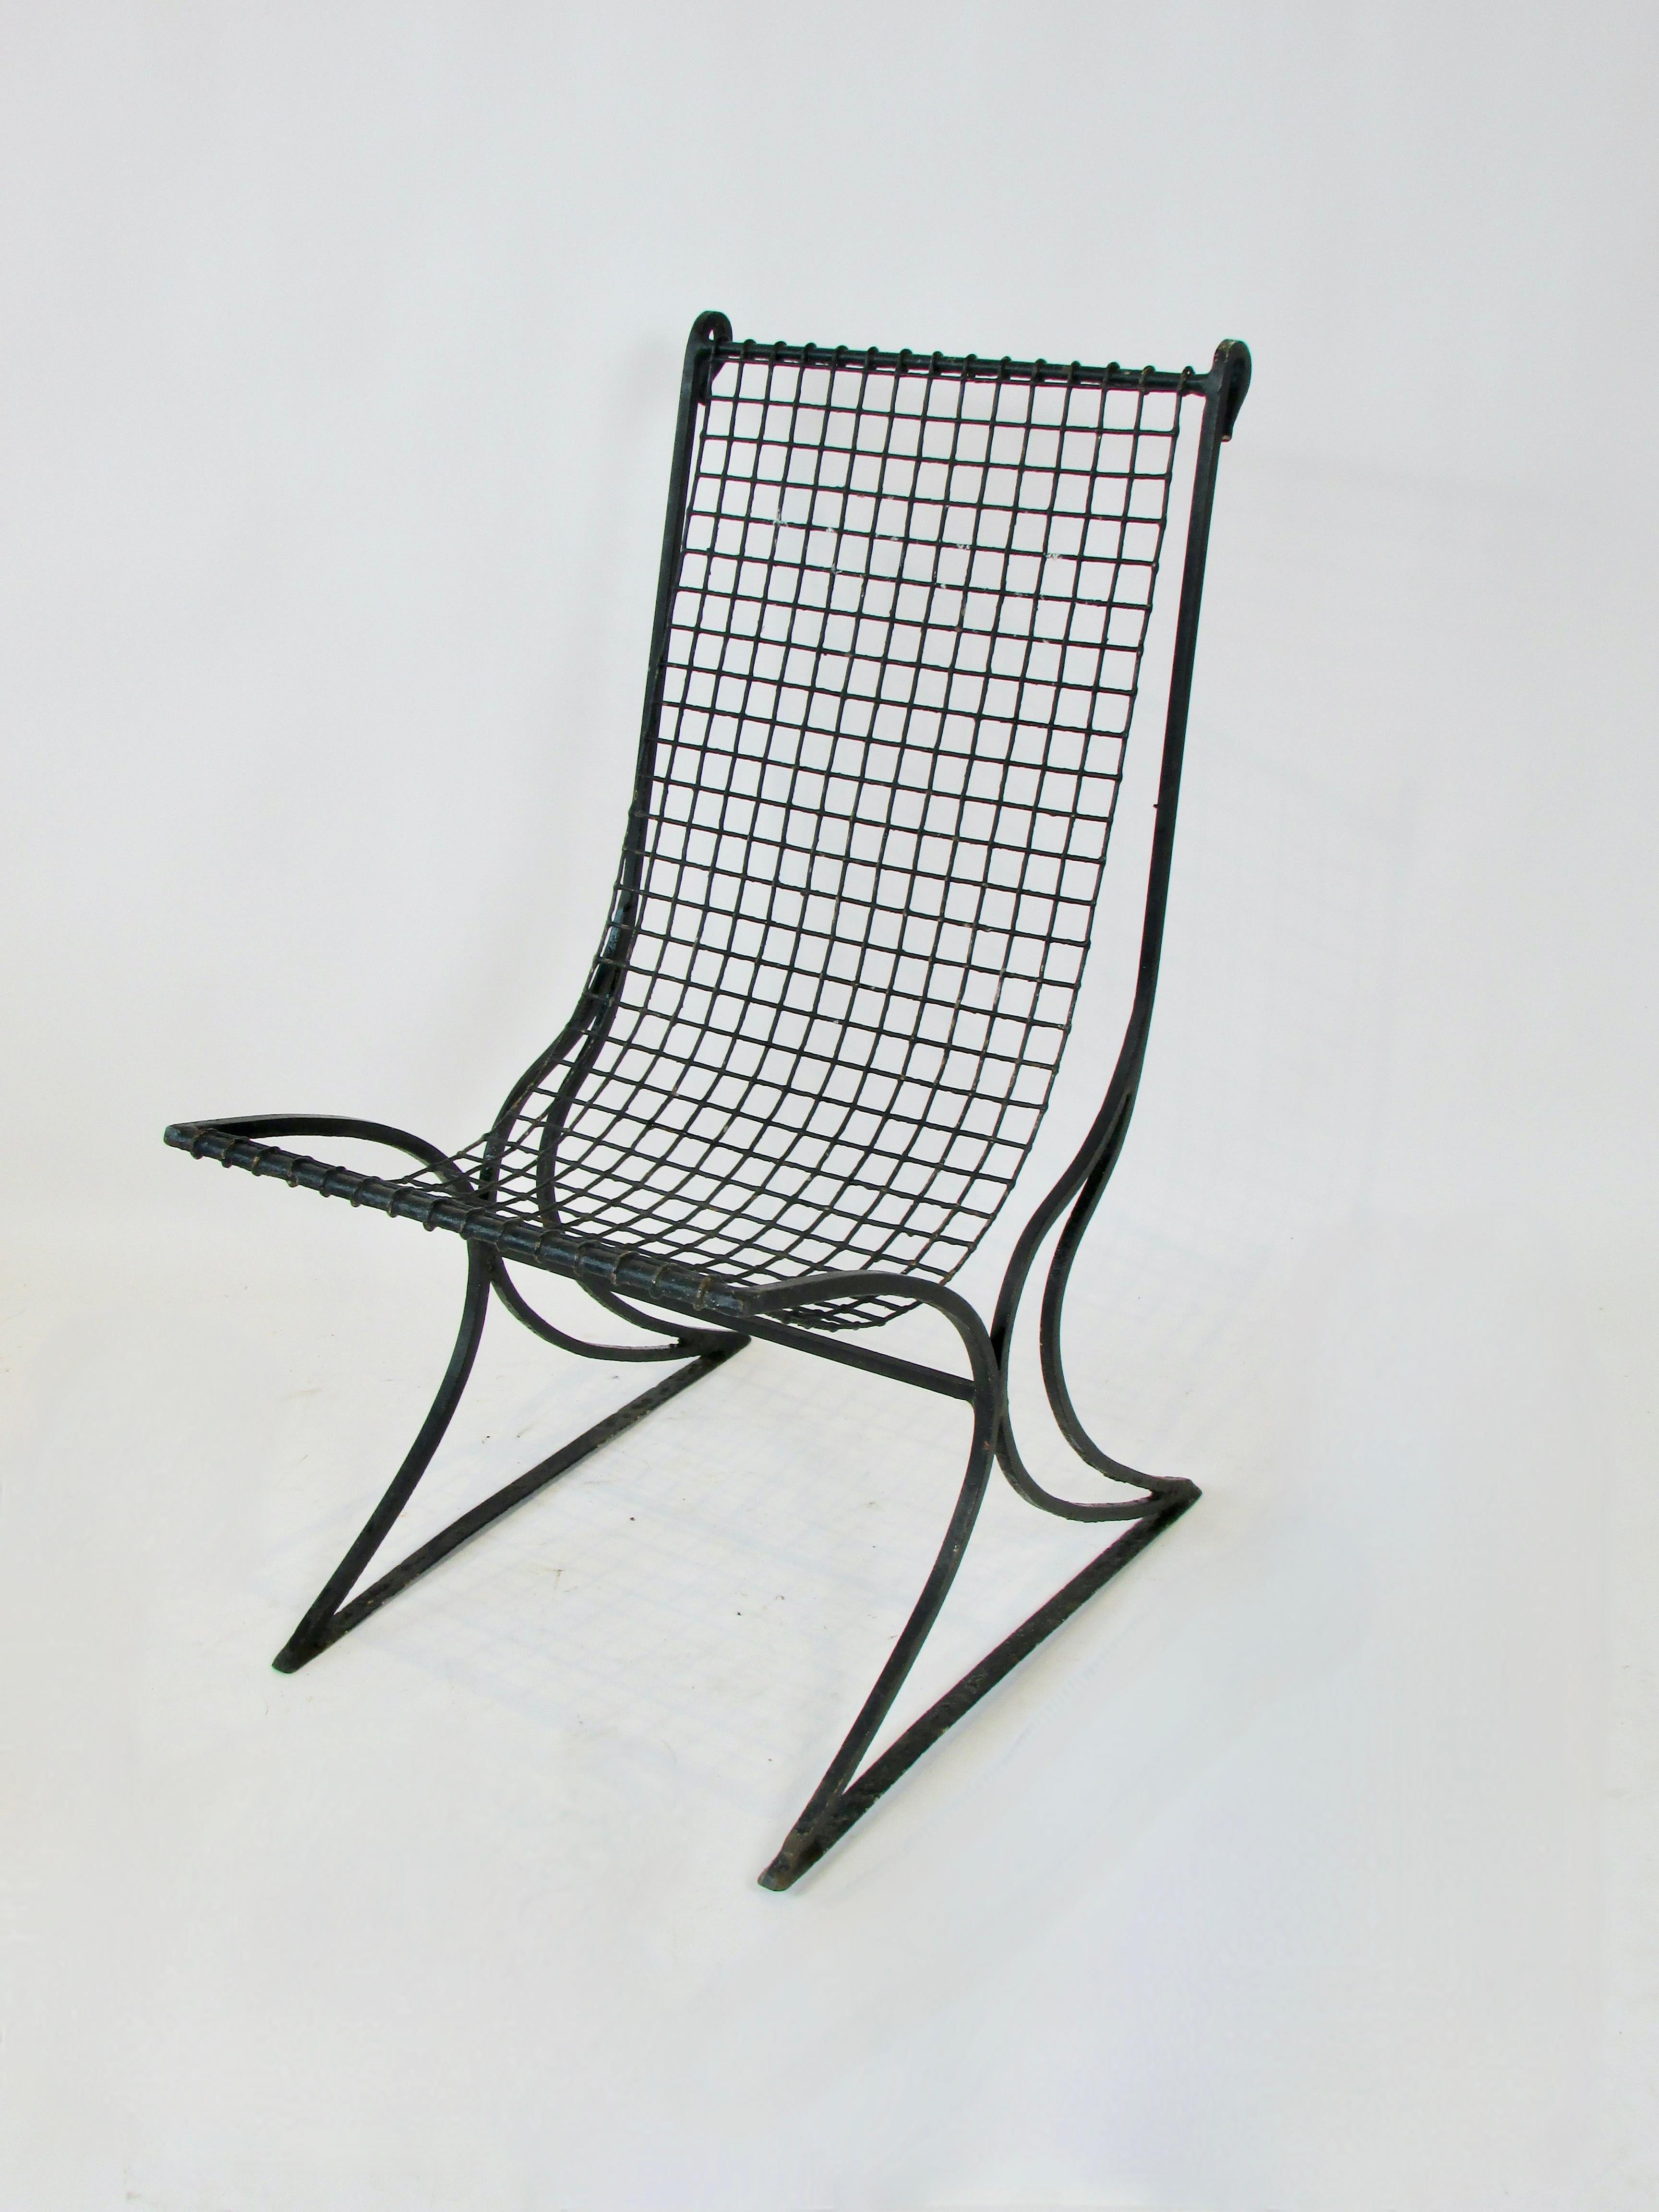 American Classical Early 20th century wrought iron with wire seat garden chair in old black paint For Sale